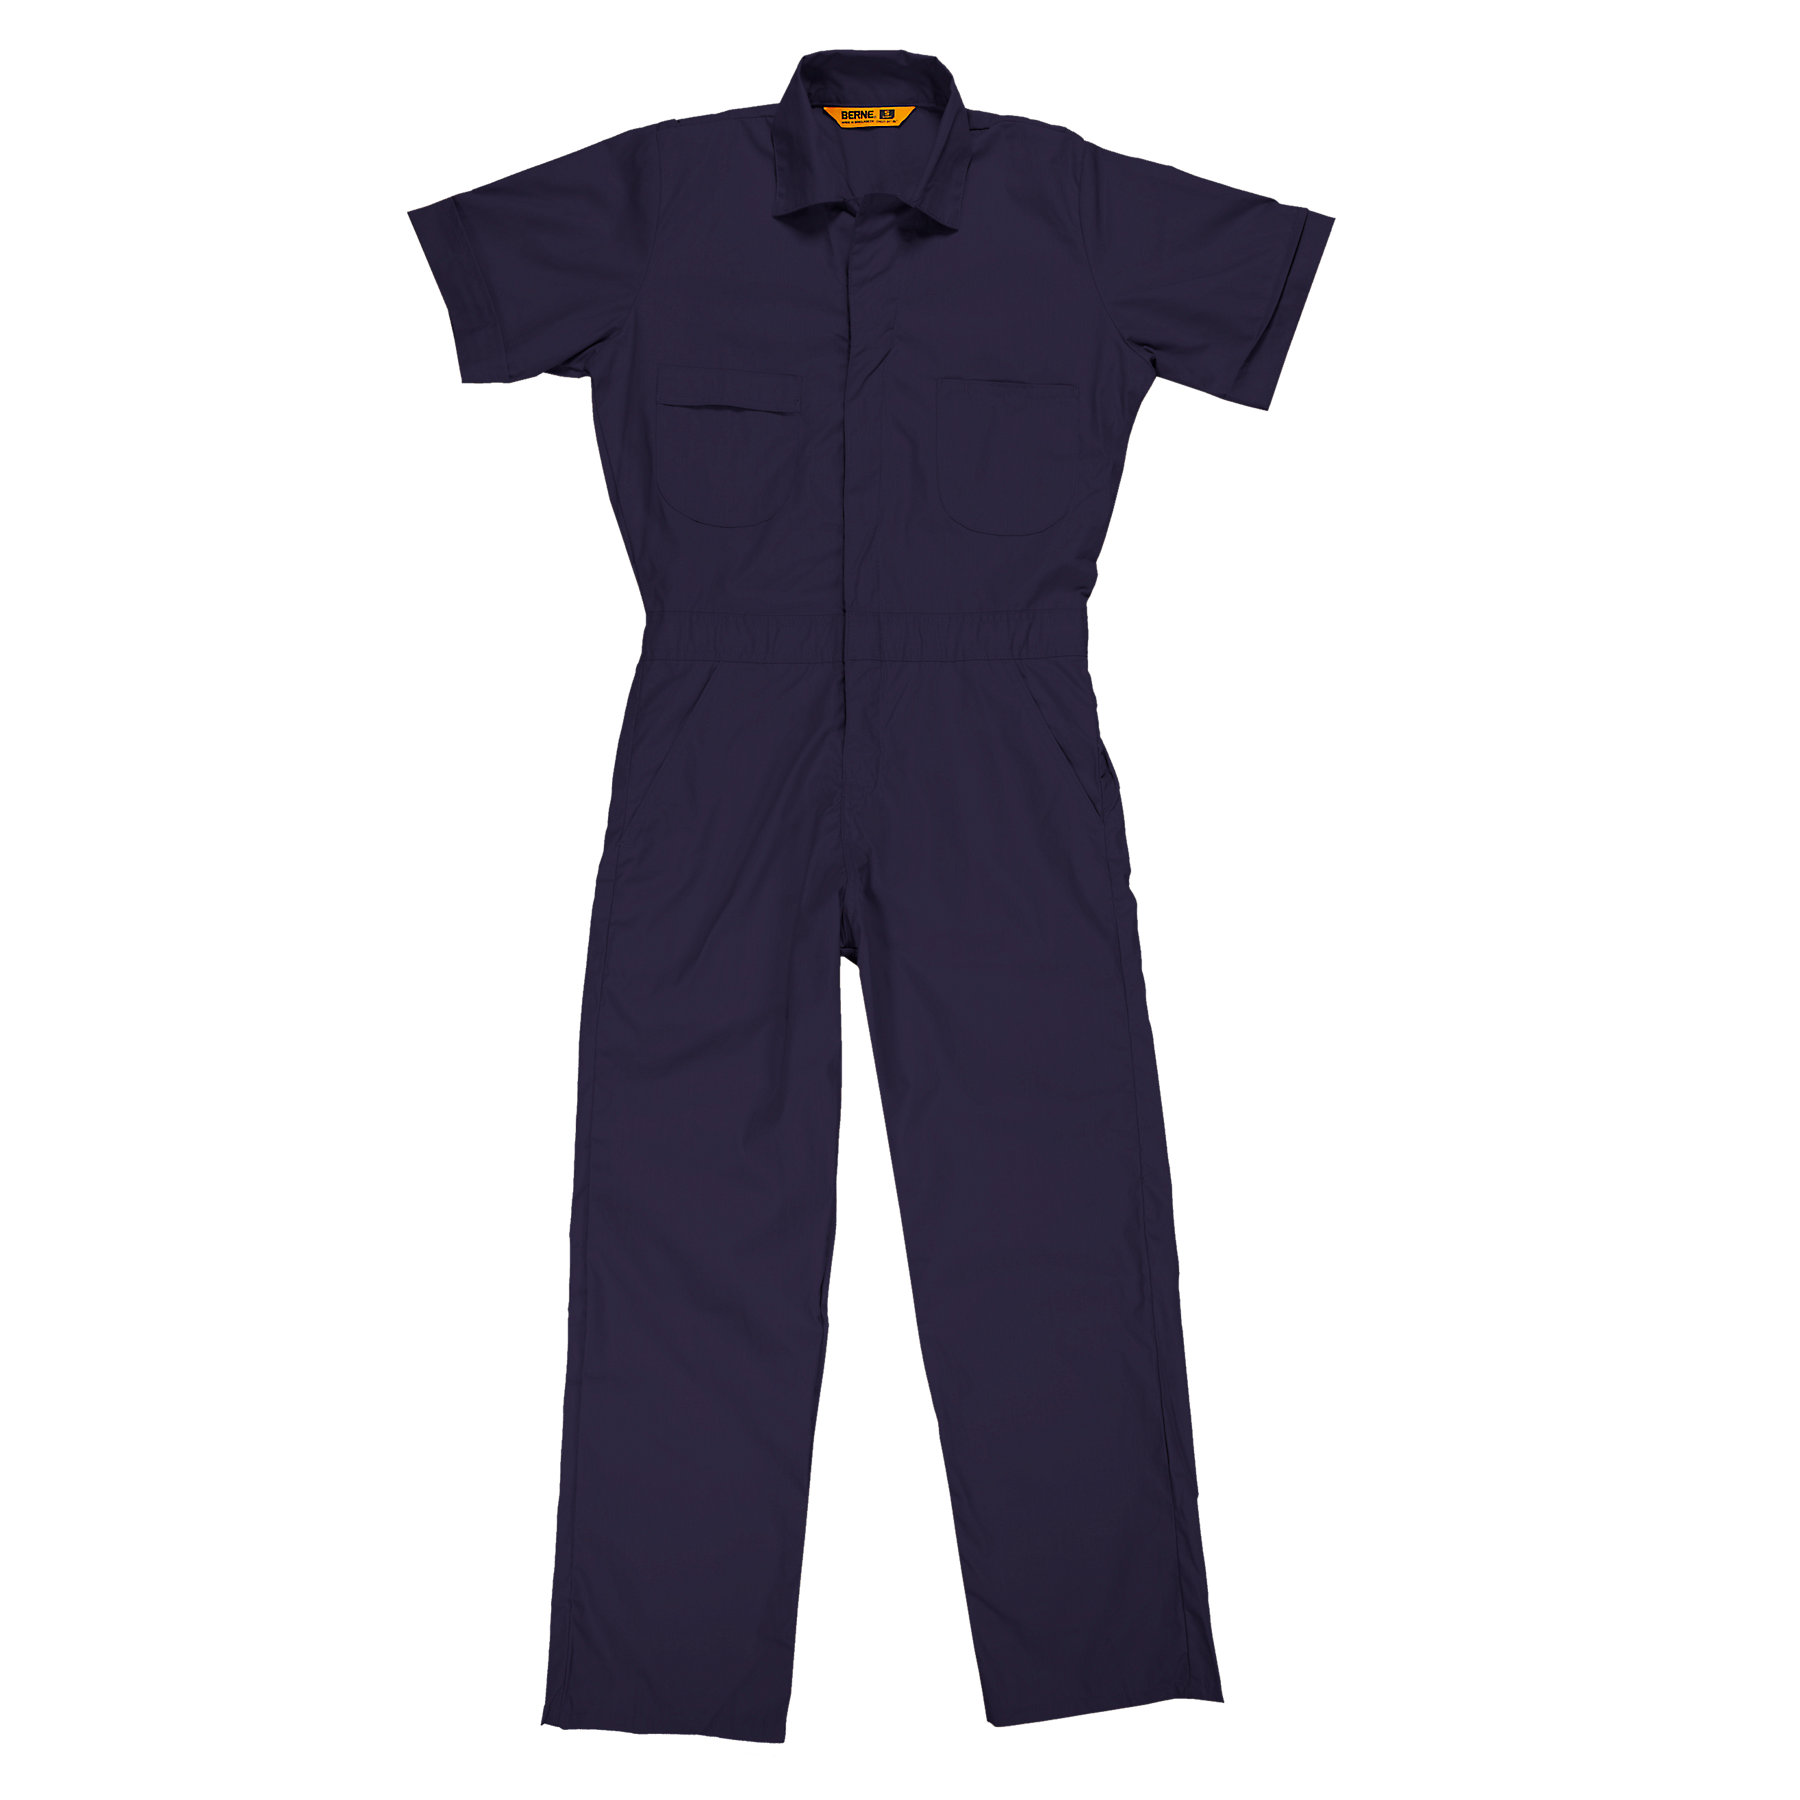 Berne Coverall Size Chart